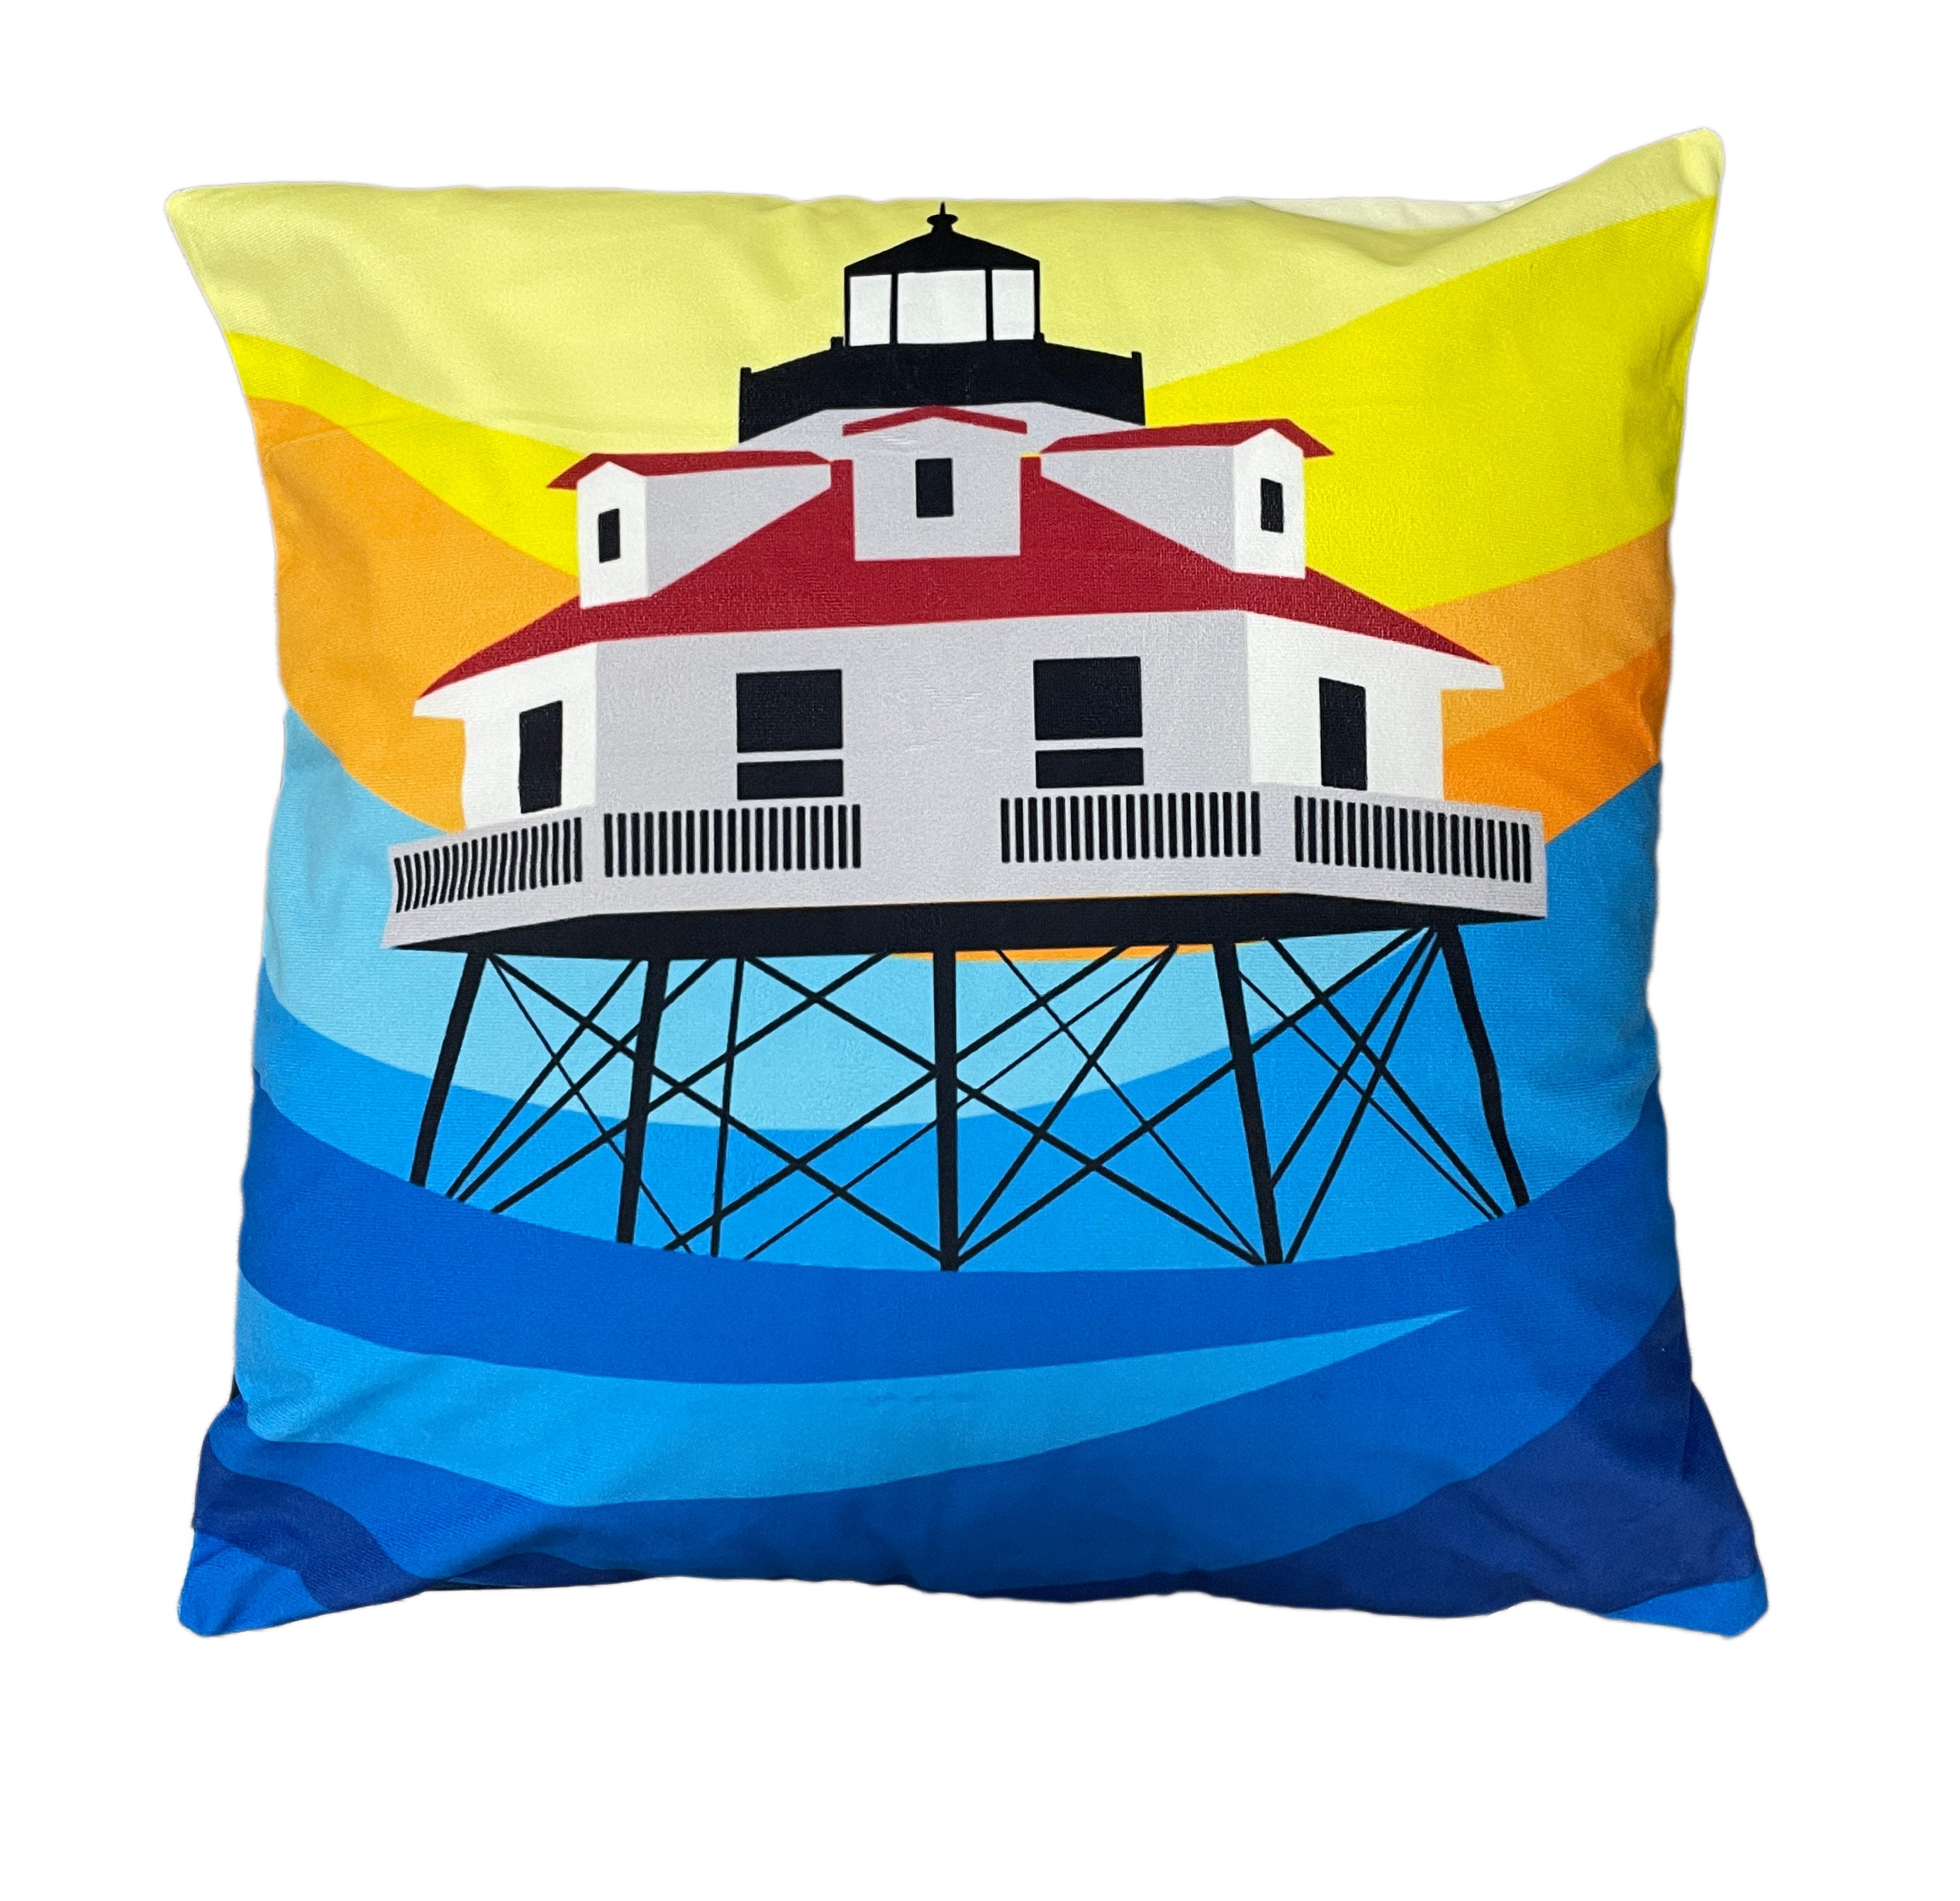 Sailboat & Lighthouse / Throw Pillow - Route One Apparel